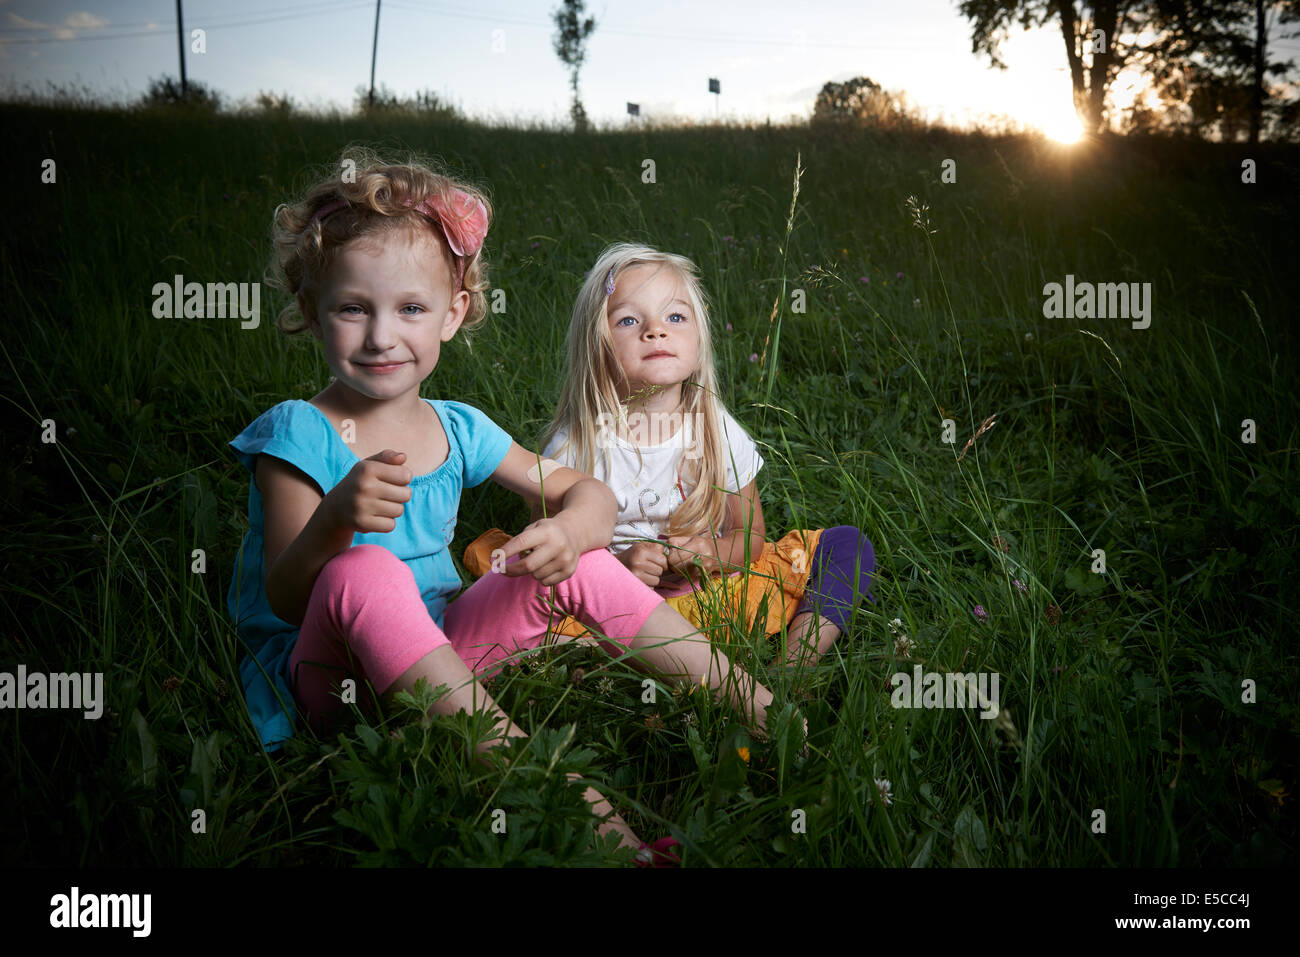 Portrait of children blond two girls sisters sitting in grassy field summertime Stock Photo